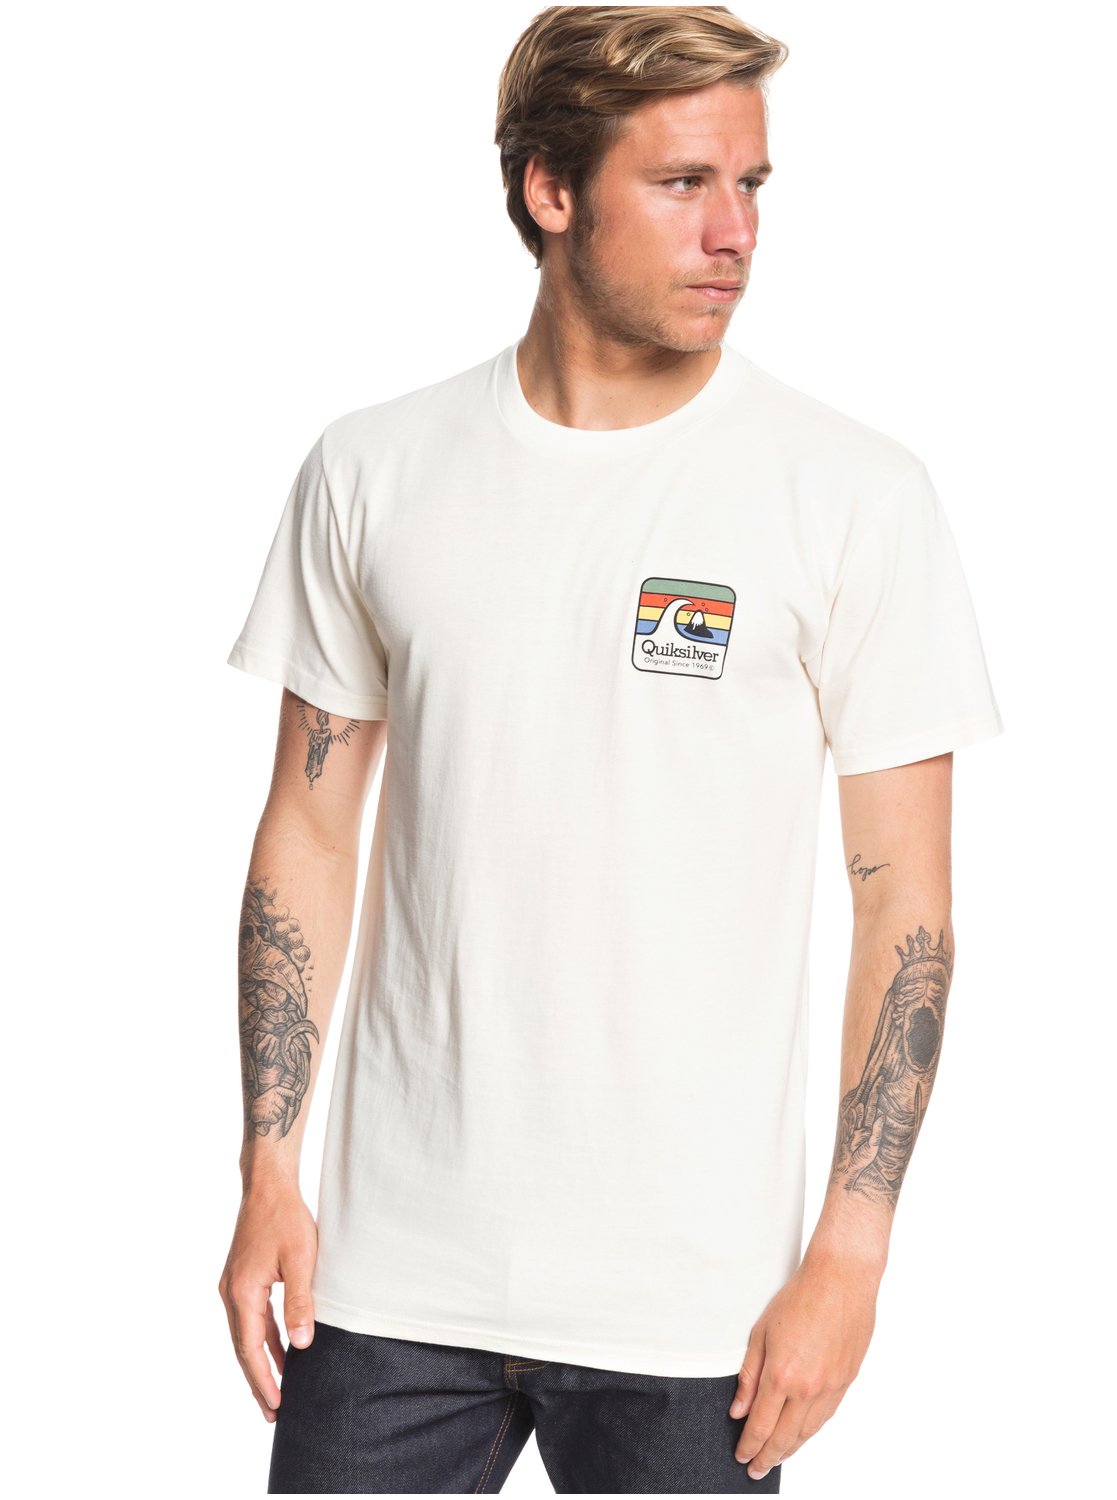 Quiksilver Clean Lines Tee WCL0 S